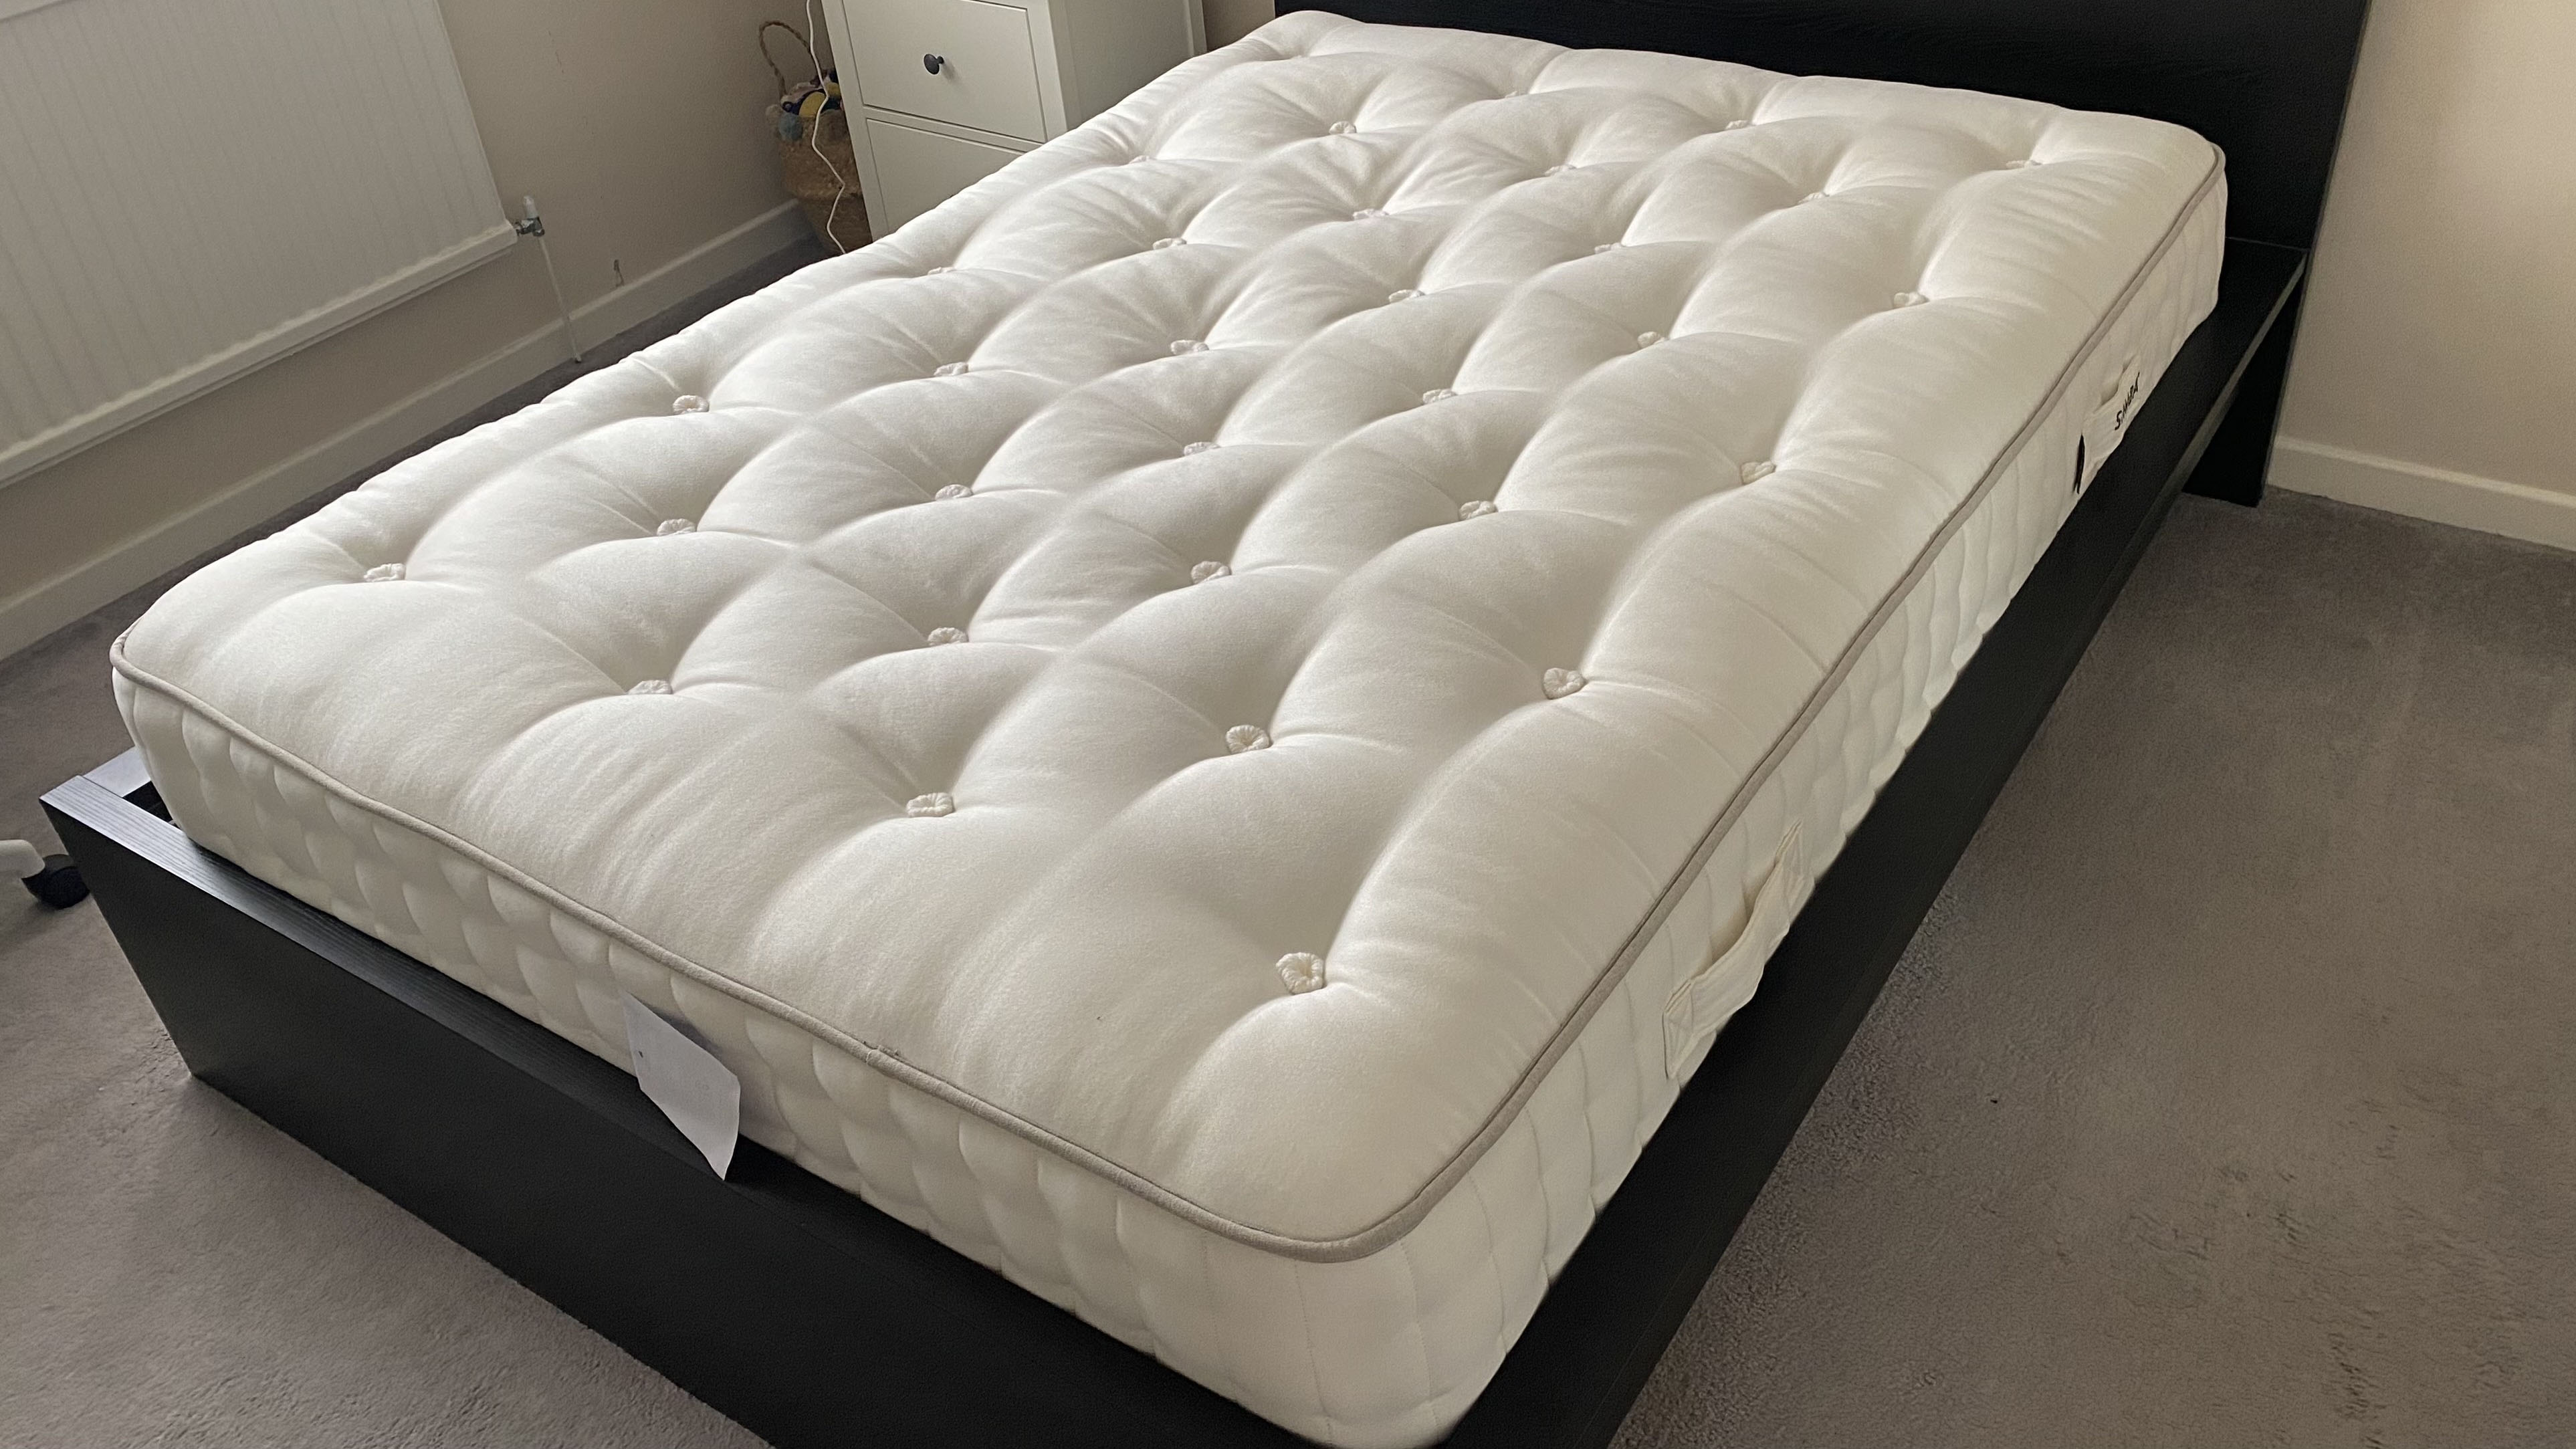 The Simba Earth Escape Mattress in the reviewer's bedroom, after white glove mattress installation